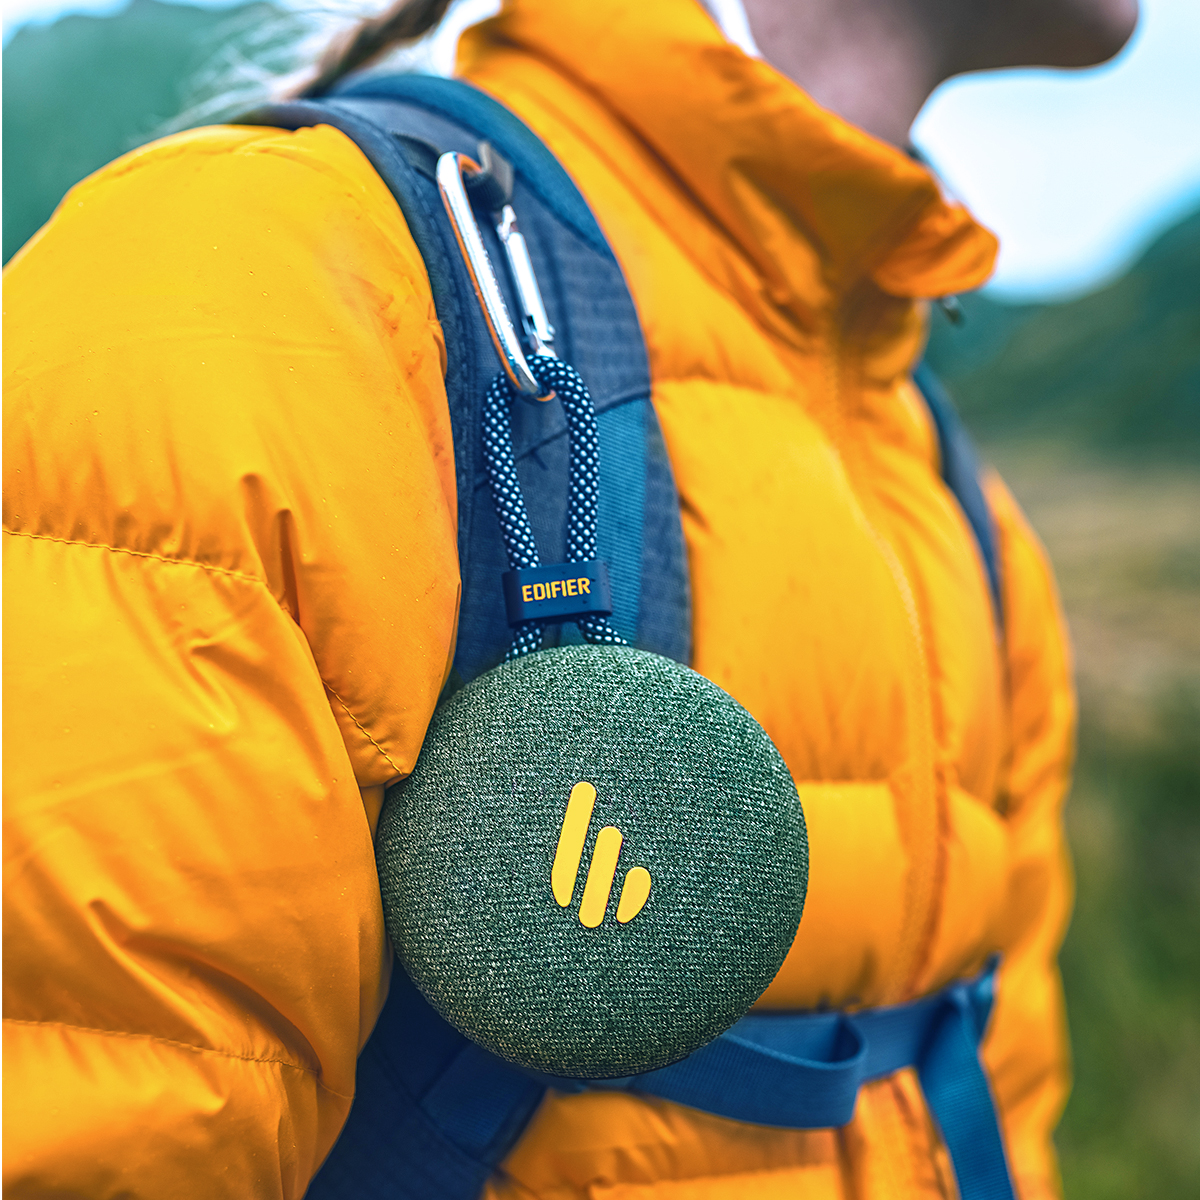 The MP100 Plus Speaker is covered in a dustproof mesh fabric. It's long-lasting and durable, making it perfect for outdoor activities such as hiking and beach volleyball 🤾‍♀️.

#EdifierMalaysia #Edifier#bluetooth #speaker #bluetoothspeaker #lifestyle #Music #MP100PLUS #IPX7